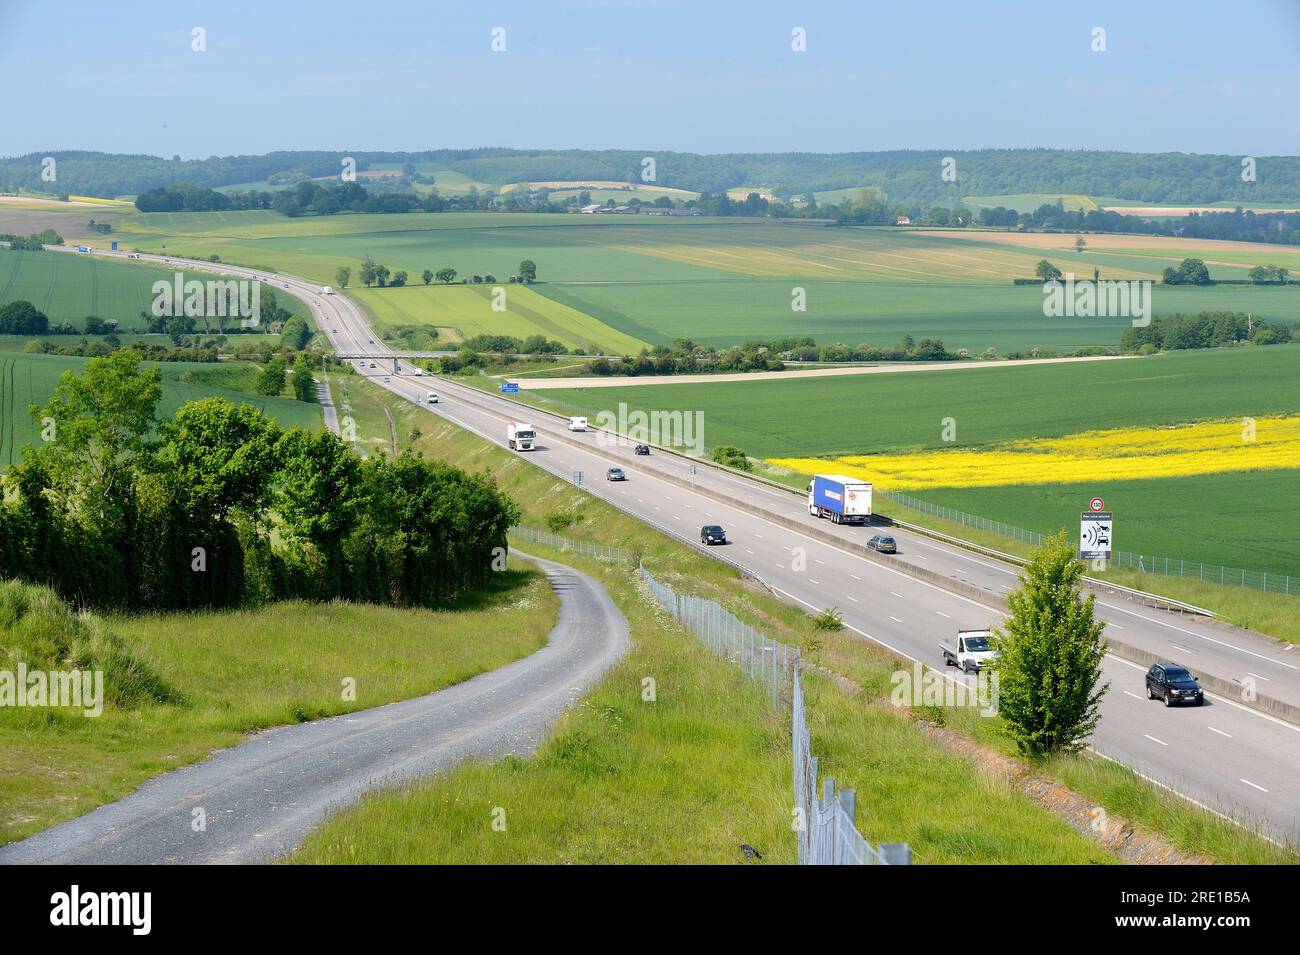 Highway A28 crossing the “pays de Bray” area. Motorway in the middle of wheat, barley, escurgeon and rapeseed fields. Access road to bordering fields, Stock Photo